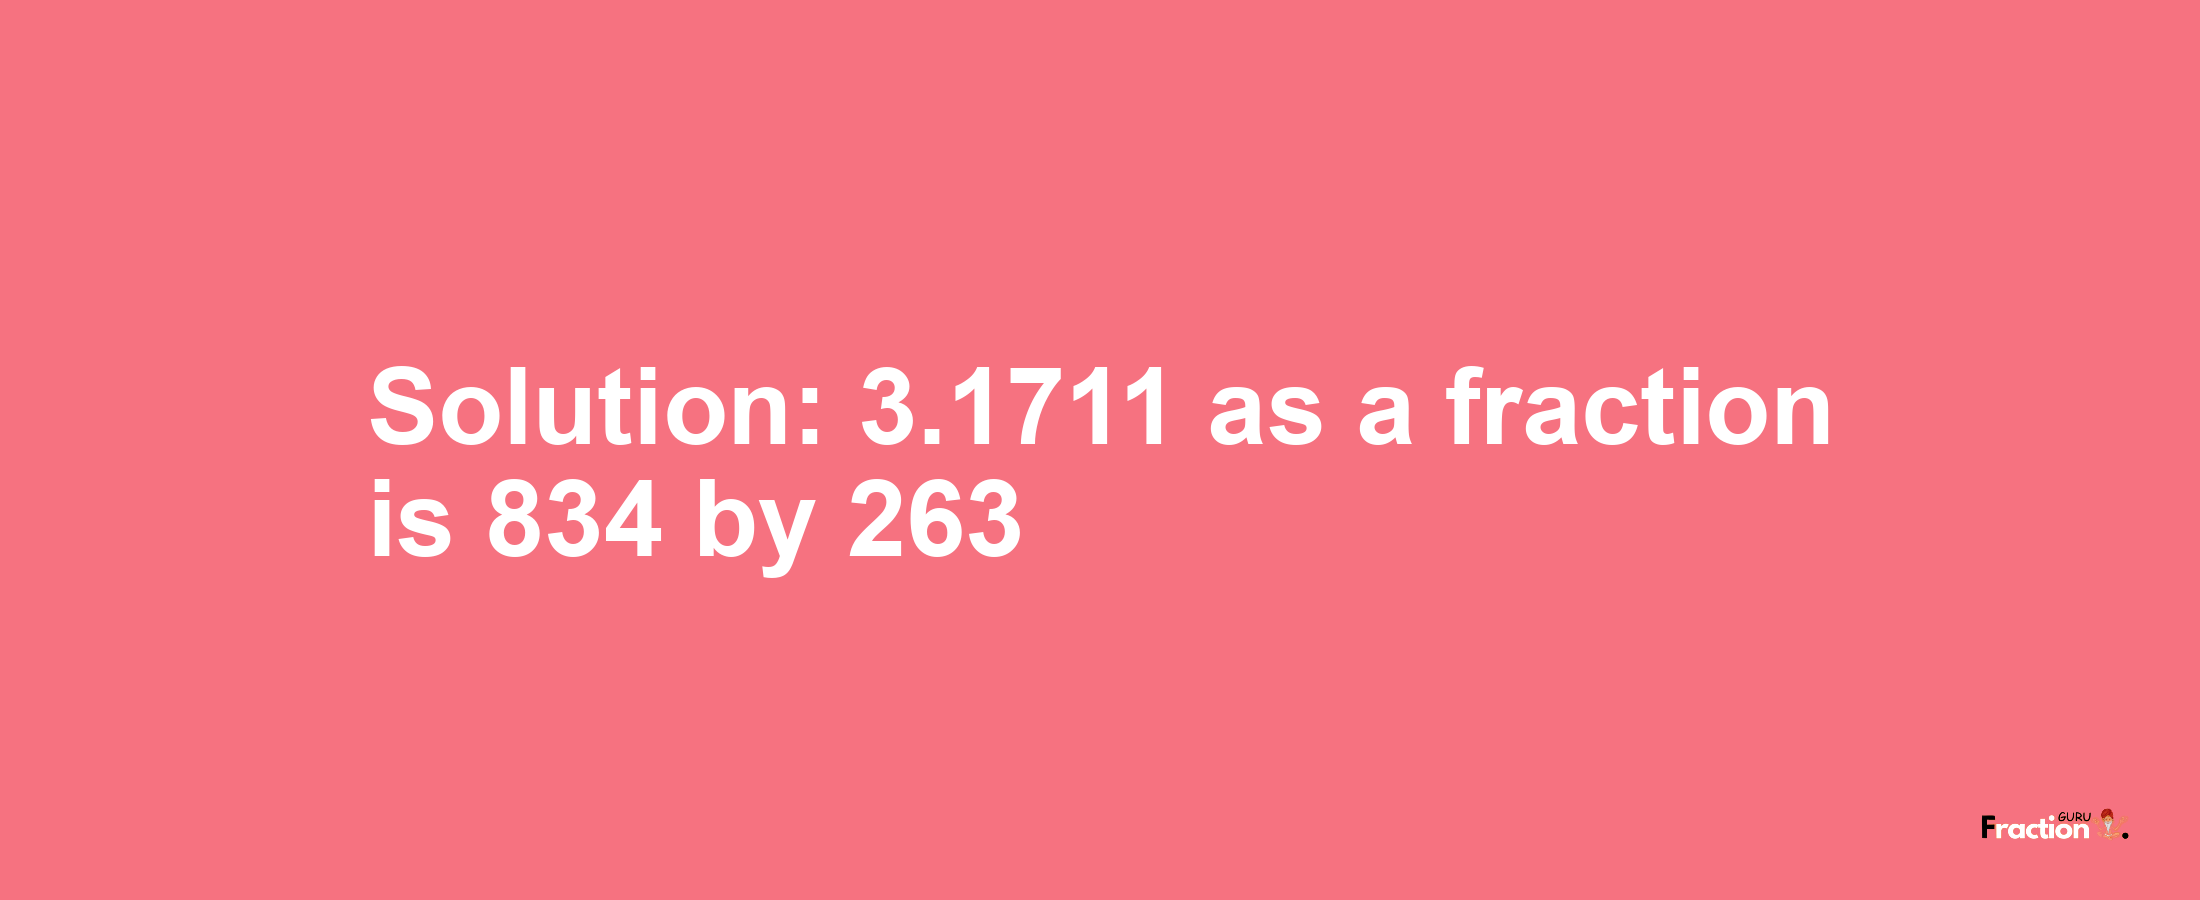 Solution:3.1711 as a fraction is 834/263